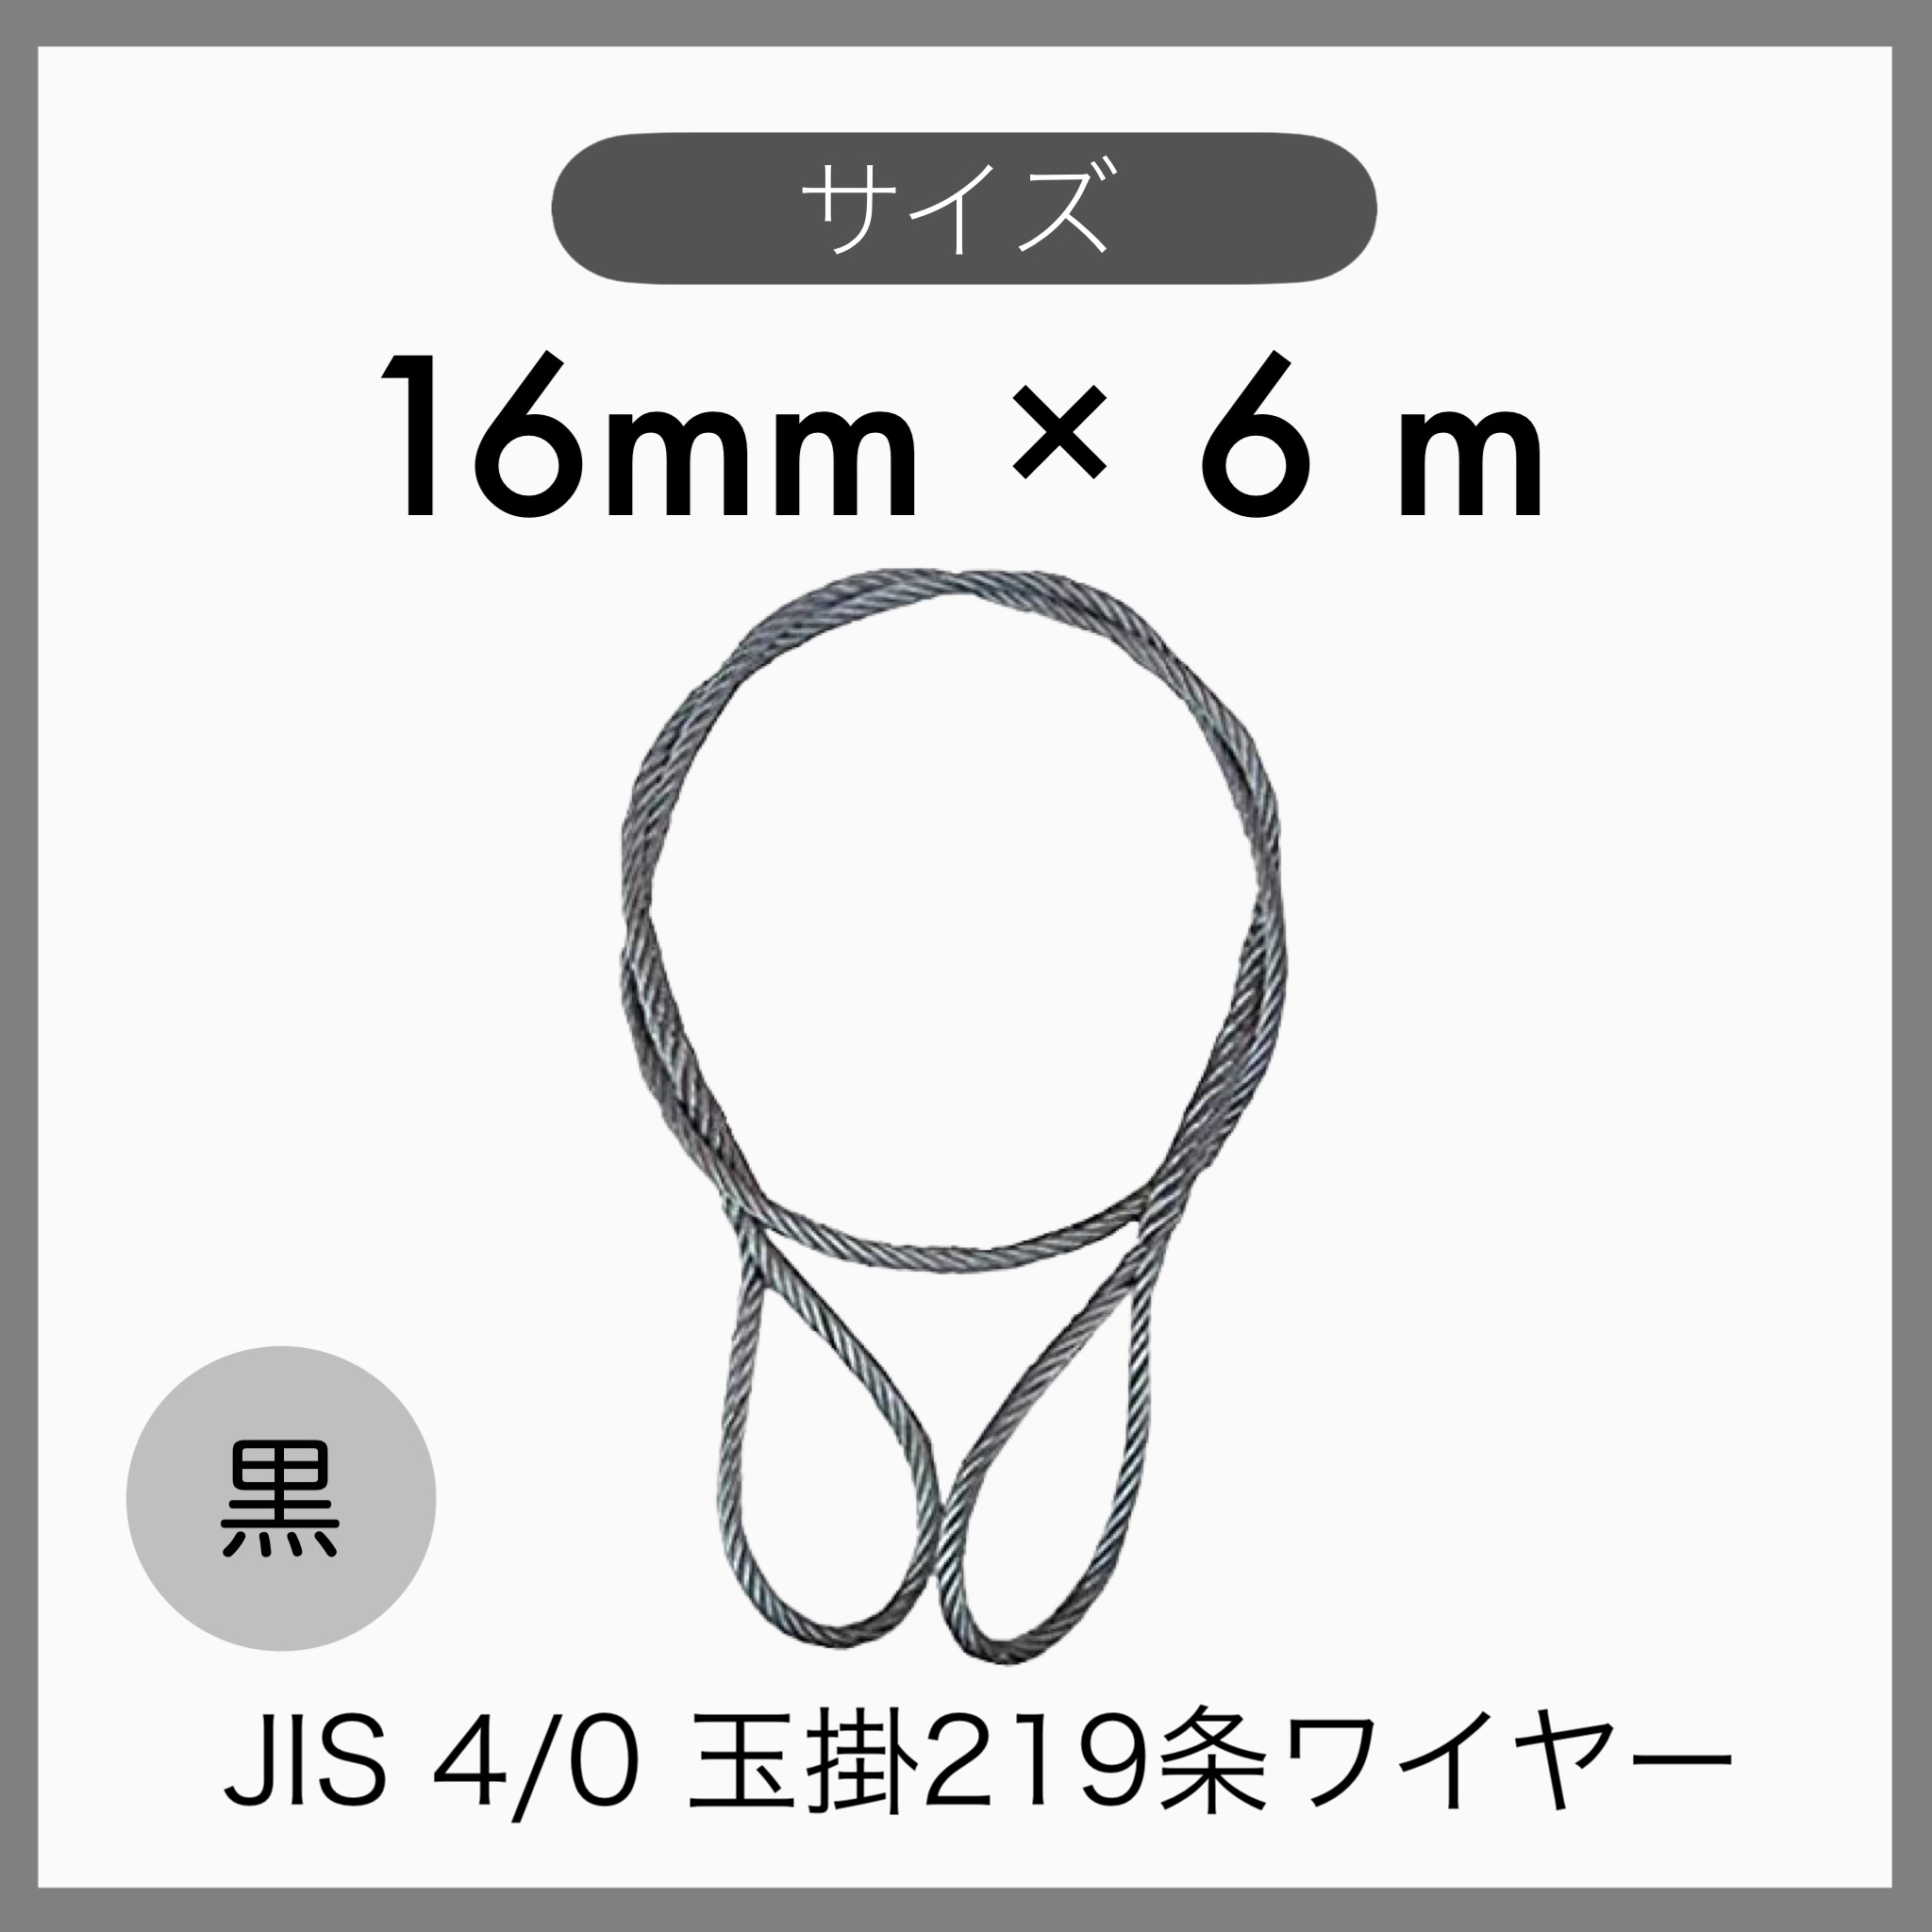 10 pcs set JIS O/O black sphere .. wire sphere ..219 article wire knitting imported goods 16mm×6m